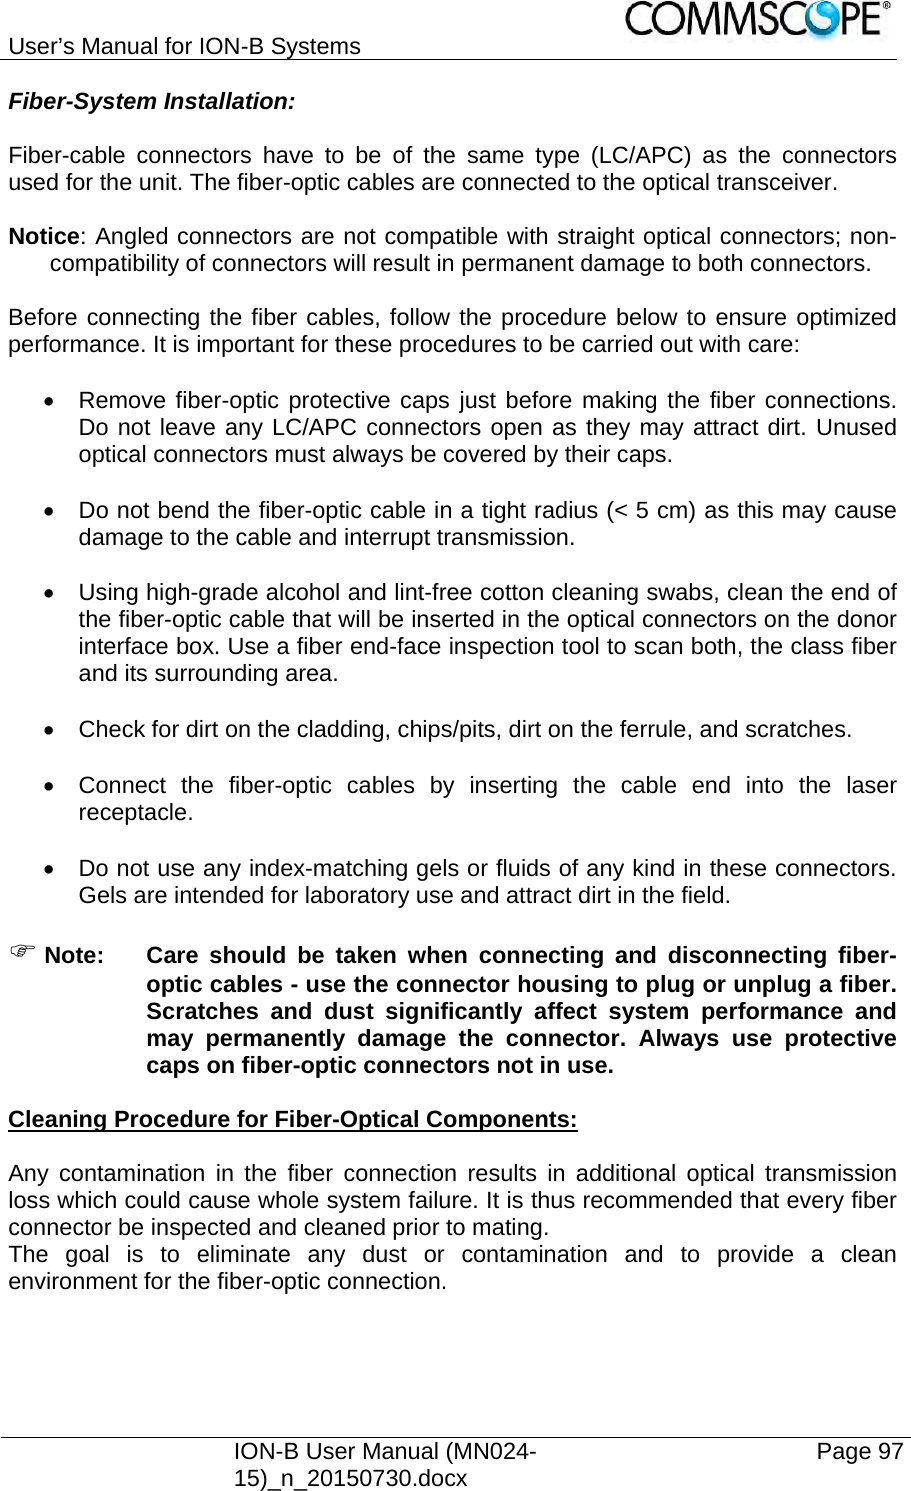 User’s Manual for ION-B Systems    ION-B User Manual (MN024-15)_n_20150730.docx  Page 97 Fiber-System Installation:  Fiber-cable connectors have to be of the same type (LC/APC) as the connectors used for the unit. The fiber-optic cables are connected to the optical transceiver.  Notice: Angled connectors are not compatible with straight optical connectors; non-compatibility of connectors will result in permanent damage to both connectors.  Before connecting the fiber cables, follow the procedure below to ensure optimized performance. It is important for these procedures to be carried out with care:    Remove fiber-optic protective caps just before making the fiber connections. Do not leave any LC/APC connectors open as they may attract dirt. Unused optical connectors must always be covered by their caps.    Do not bend the fiber-optic cable in a tight radius (&lt; 5 cm) as this may cause damage to the cable and interrupt transmission.    Using high-grade alcohol and lint-free cotton cleaning swabs, clean the end of the fiber-optic cable that will be inserted in the optical connectors on the donor interface box. Use a fiber end-face inspection tool to scan both, the class fiber and its surrounding area.    Check for dirt on the cladding, chips/pits, dirt on the ferrule, and scratches.    Connect the fiber-optic cables by inserting the cable end into the laser receptacle.    Do not use any index-matching gels or fluids of any kind in these connectors. Gels are intended for laboratory use and attract dirt in the field.   Note:  Care should be taken when connecting and disconnecting fiber-optic cables - use the connector housing to plug or unplug a fiber. Scratches and dust significantly affect system performance and may permanently damage the connector. Always use protective caps on fiber-optic connectors not in use.  Cleaning Procedure for Fiber-Optical Components:  Any contamination in the fiber connection results in additional optical transmission loss which could cause whole system failure. It is thus recommended that every fiber connector be inspected and cleaned prior to mating. The goal is to eliminate any dust or contamination and to provide a clean environment for the fiber-optic connection.   